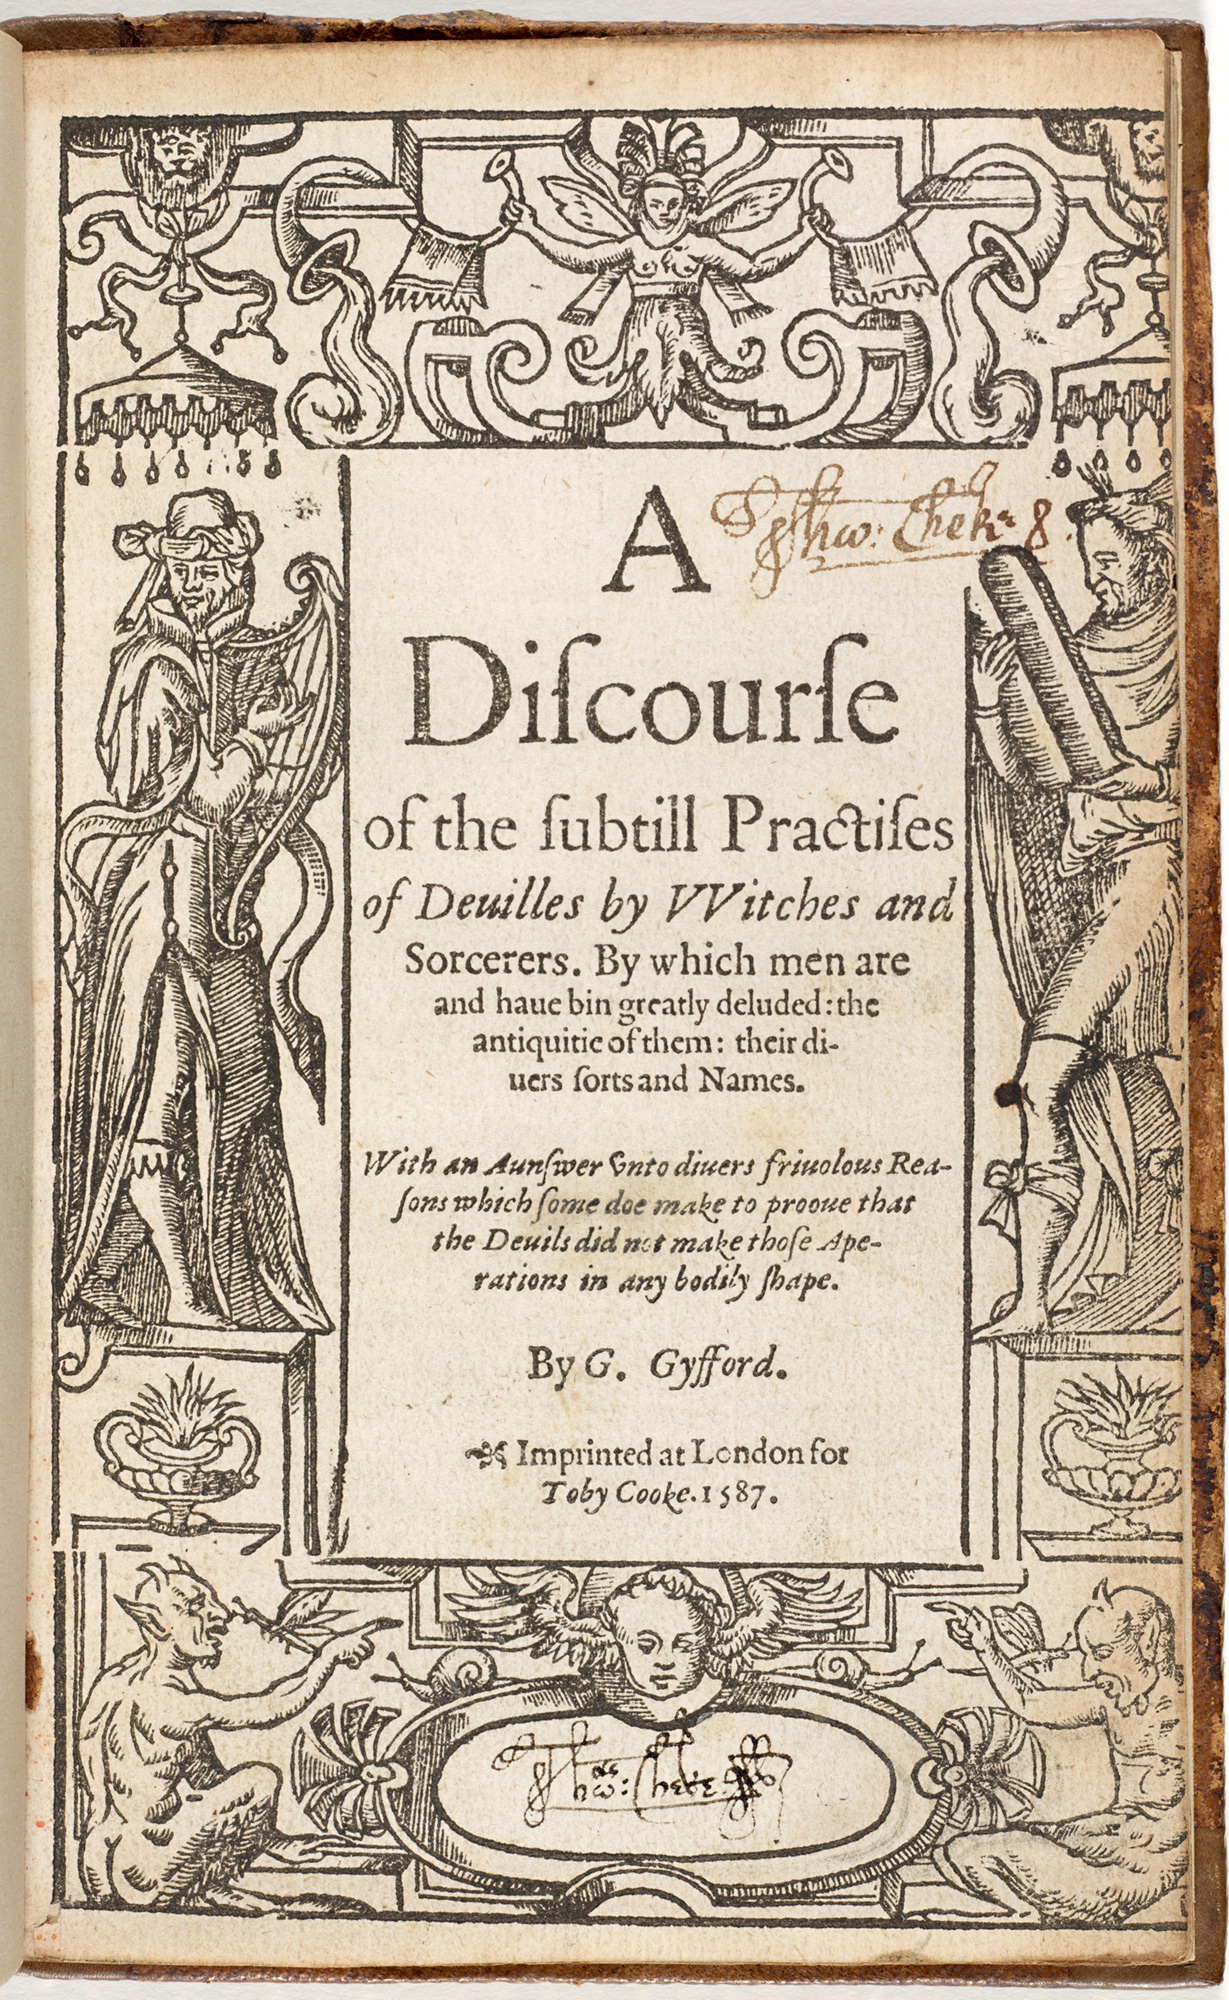 A discourse of the subtill practises of deuilles by vvitches and sorcerers, 1587, by George Gyfford